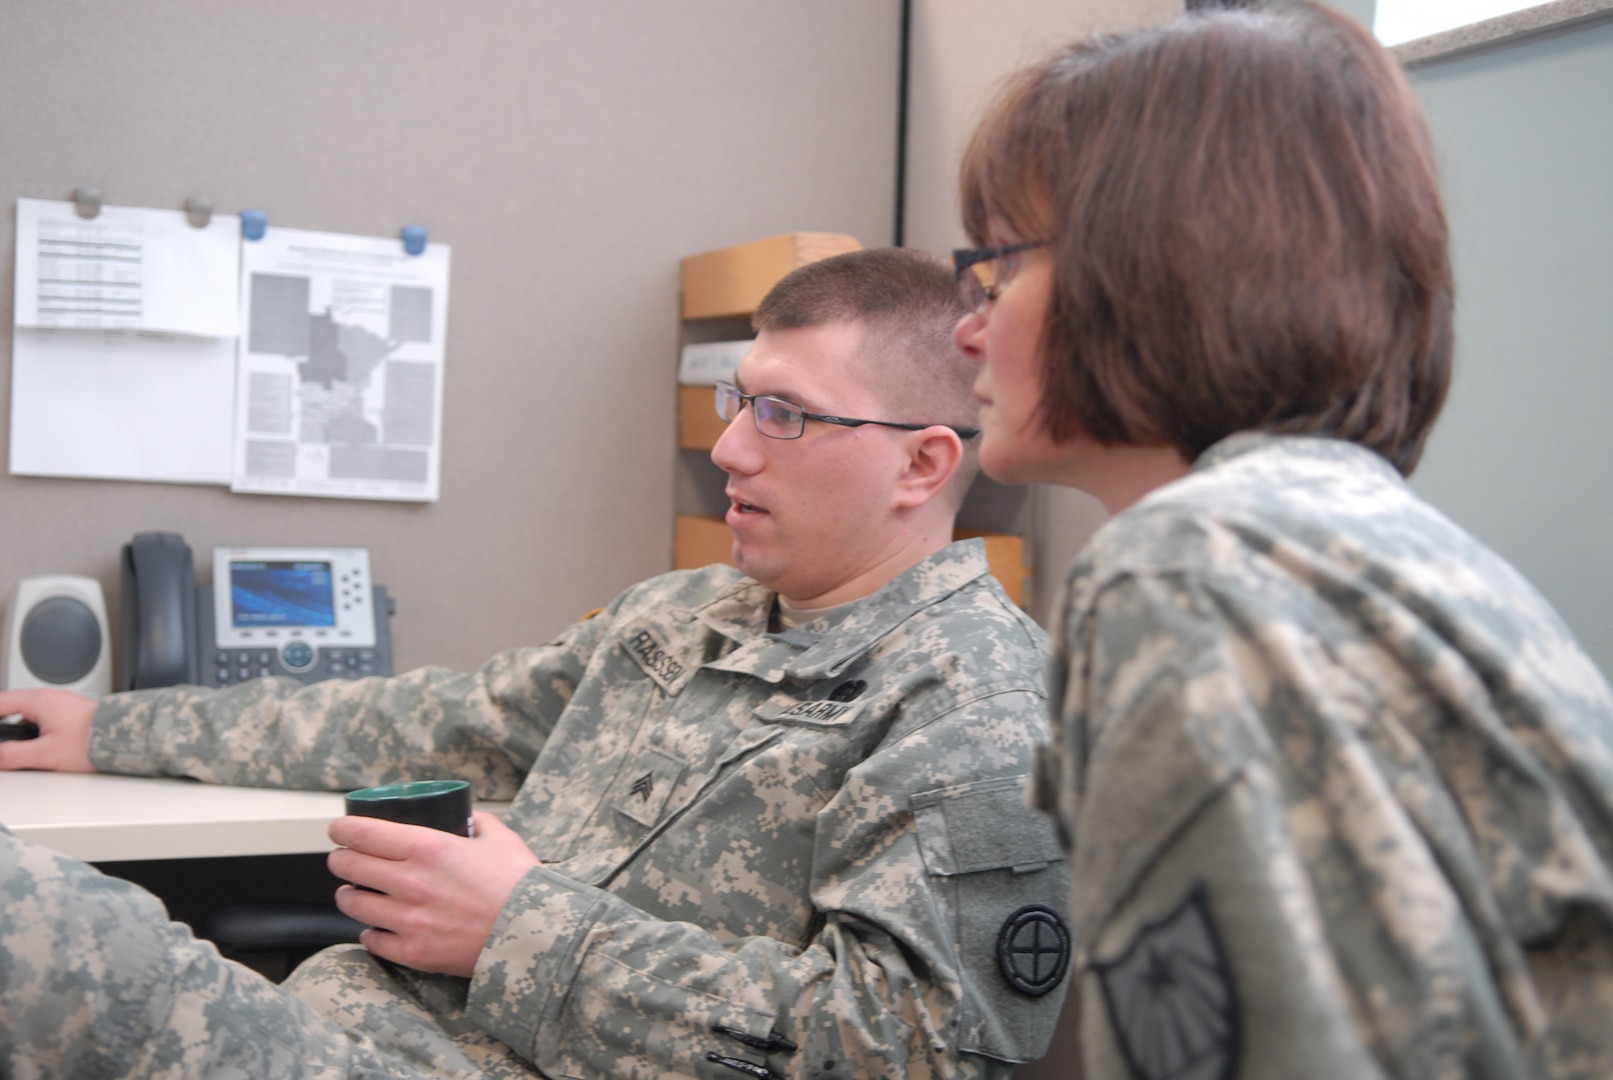 GI Bill Manager Sgt. Eric Rasmussen and Federal Tuition Assistance Manager Sgt. 1st Class Teresa Anthony discuss education benefits in the Minnesota National Guard's Education Office in Saint Paul, Minn.